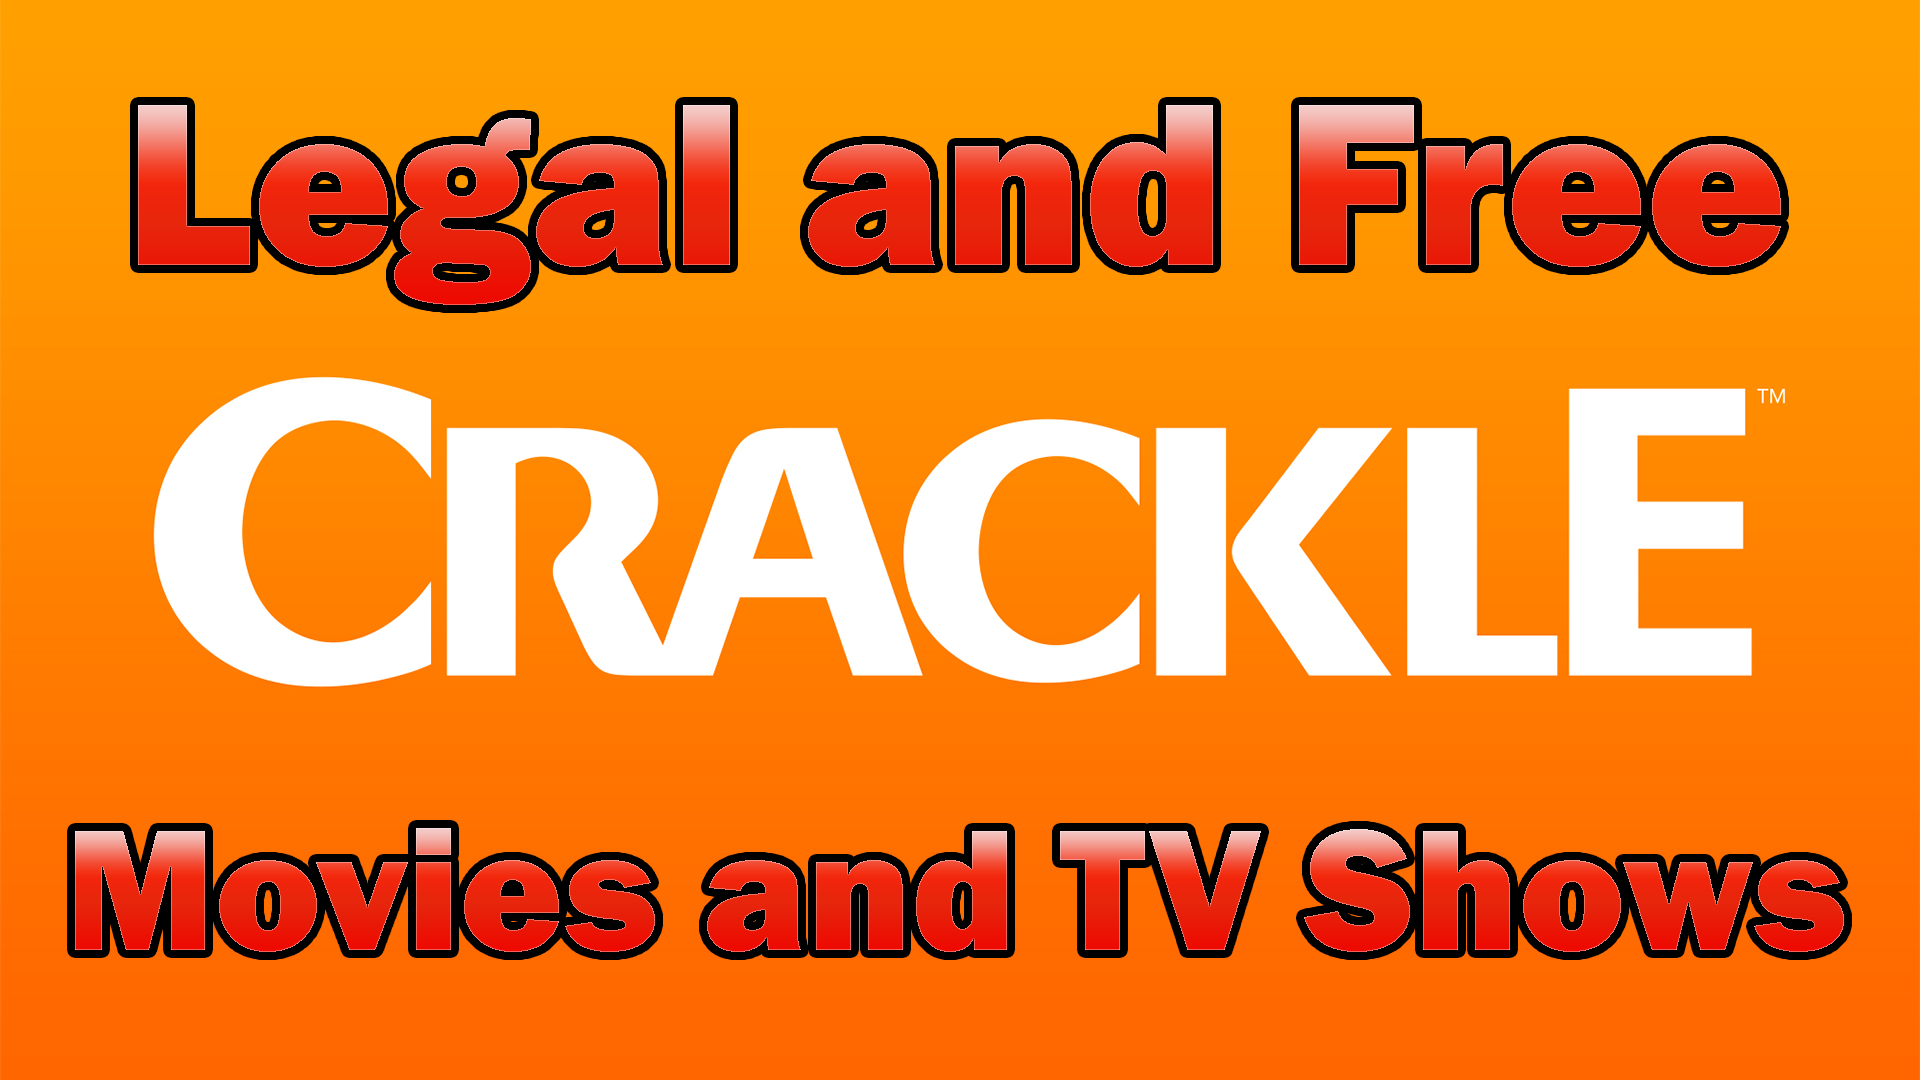 Sony Crackle has FREE Legal Movies and TV Shows to Stream